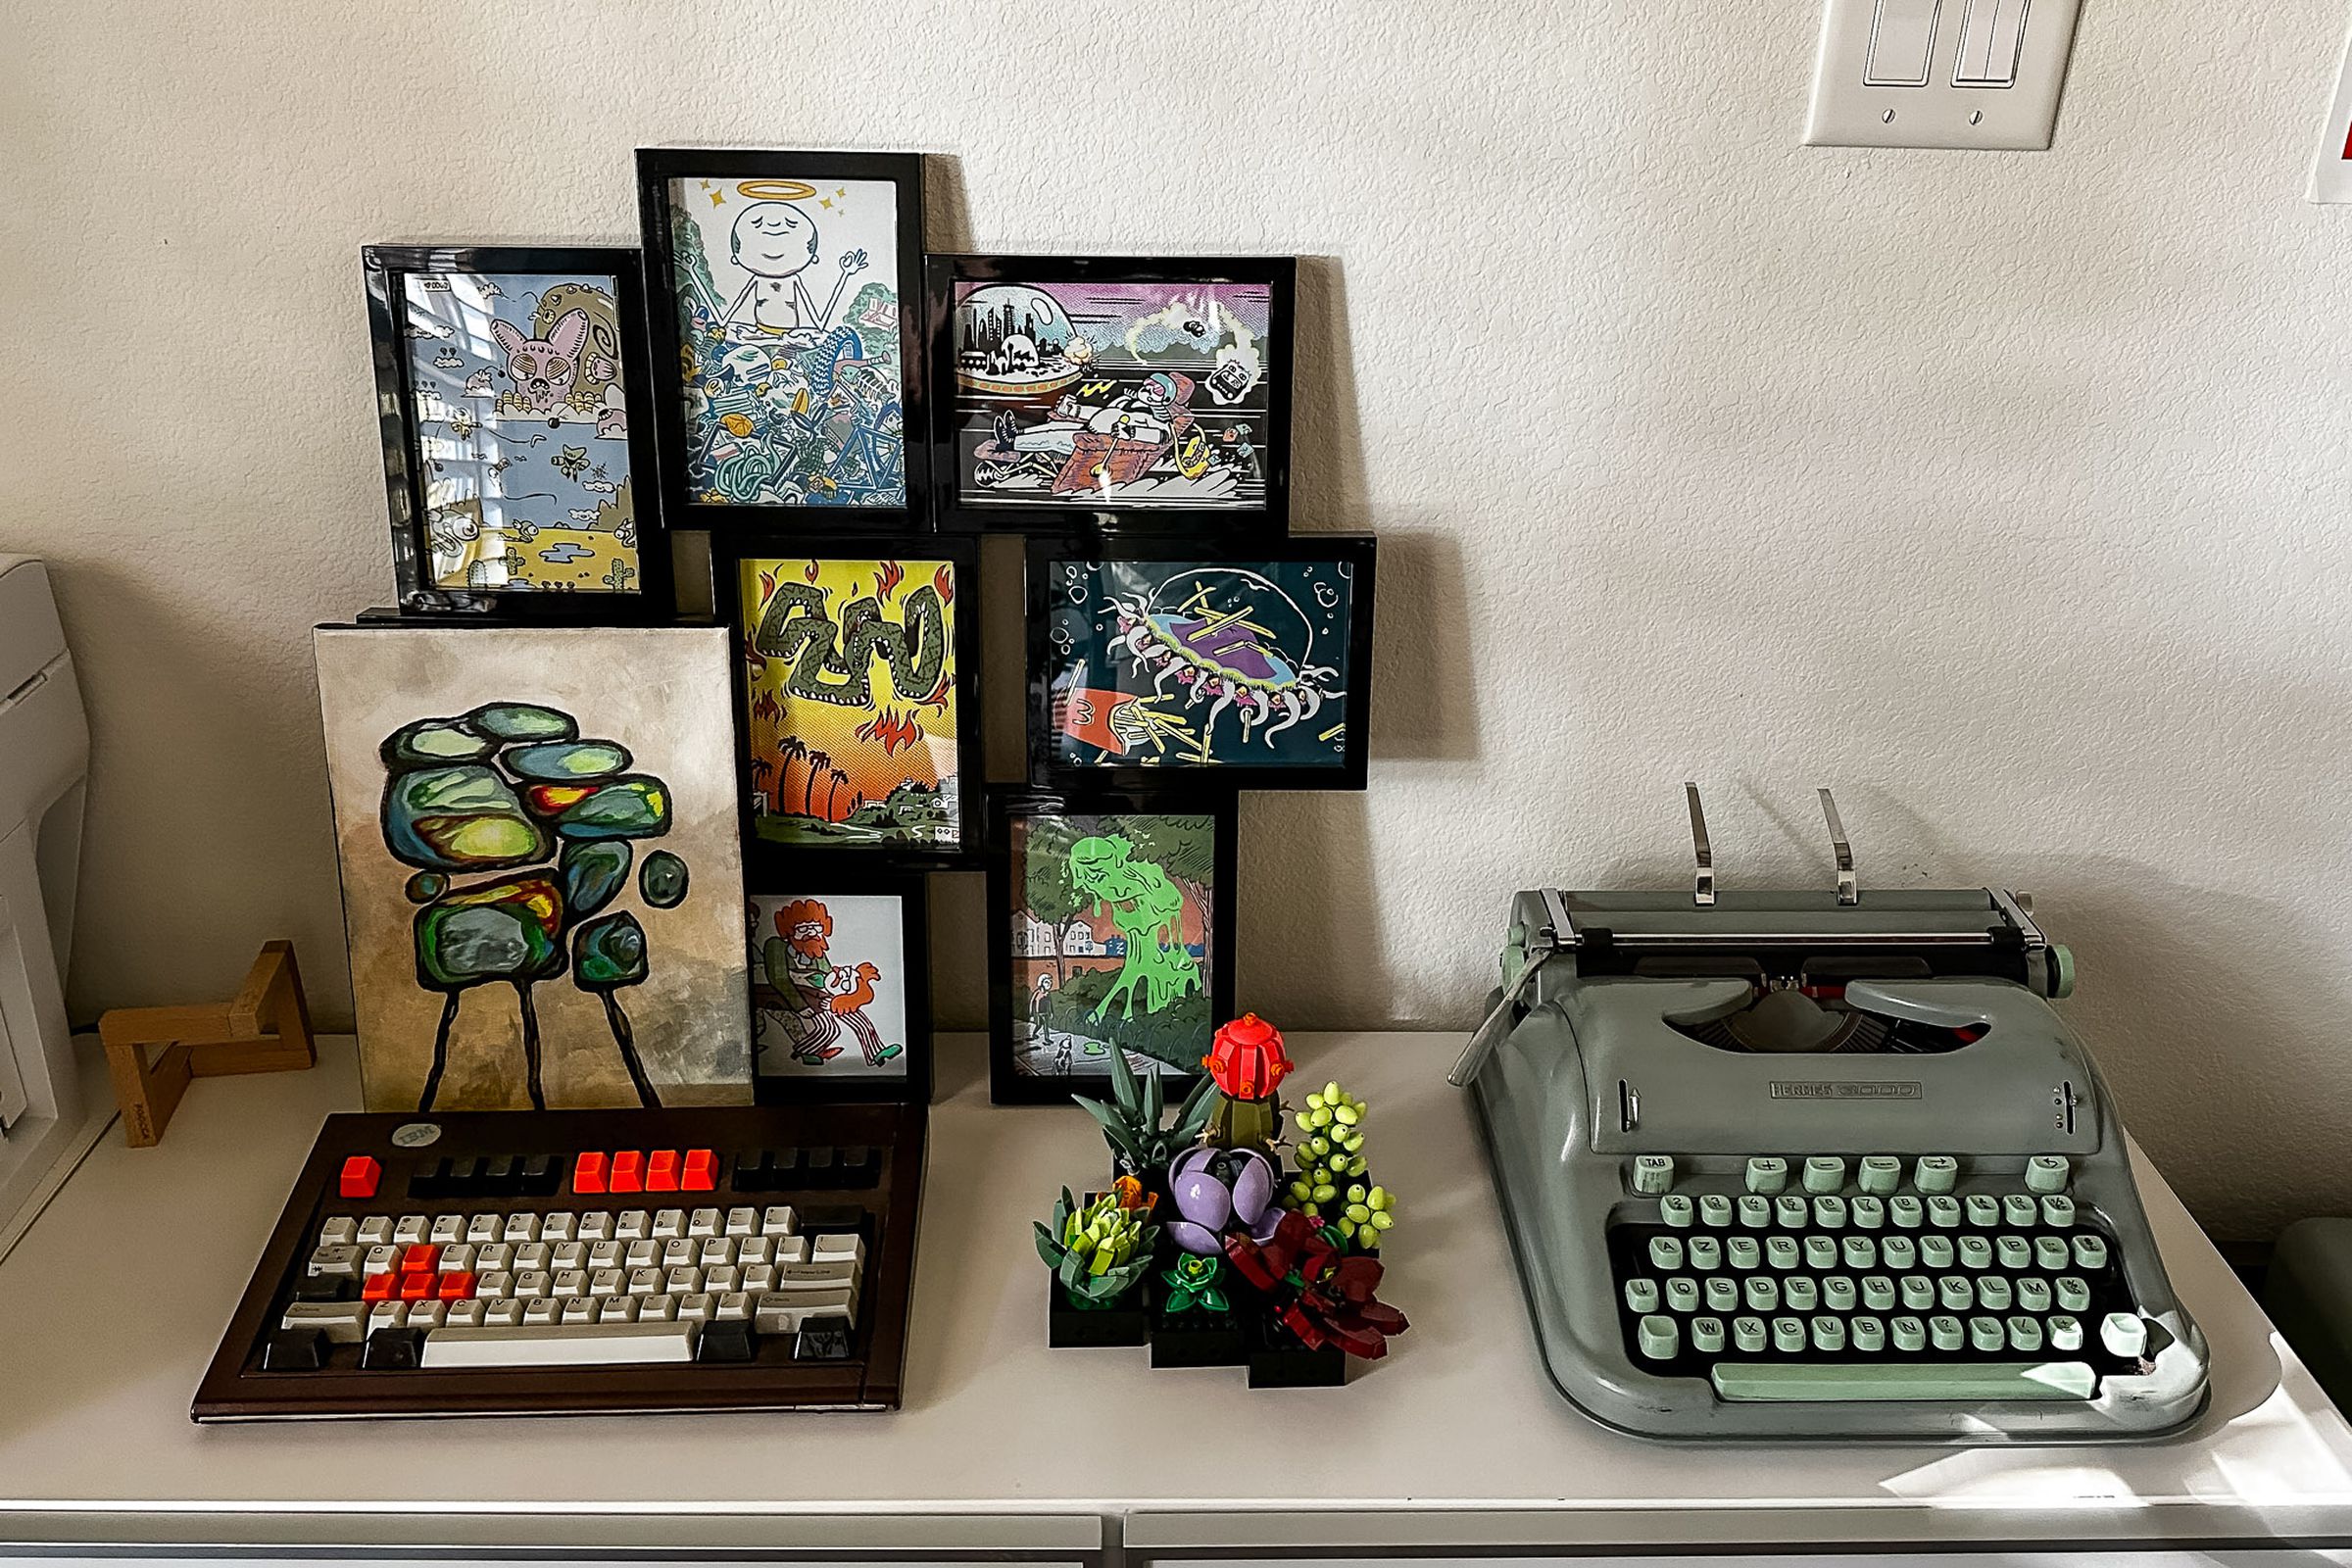 Table with art, a keyboard on the left, and a typewriter on the right.